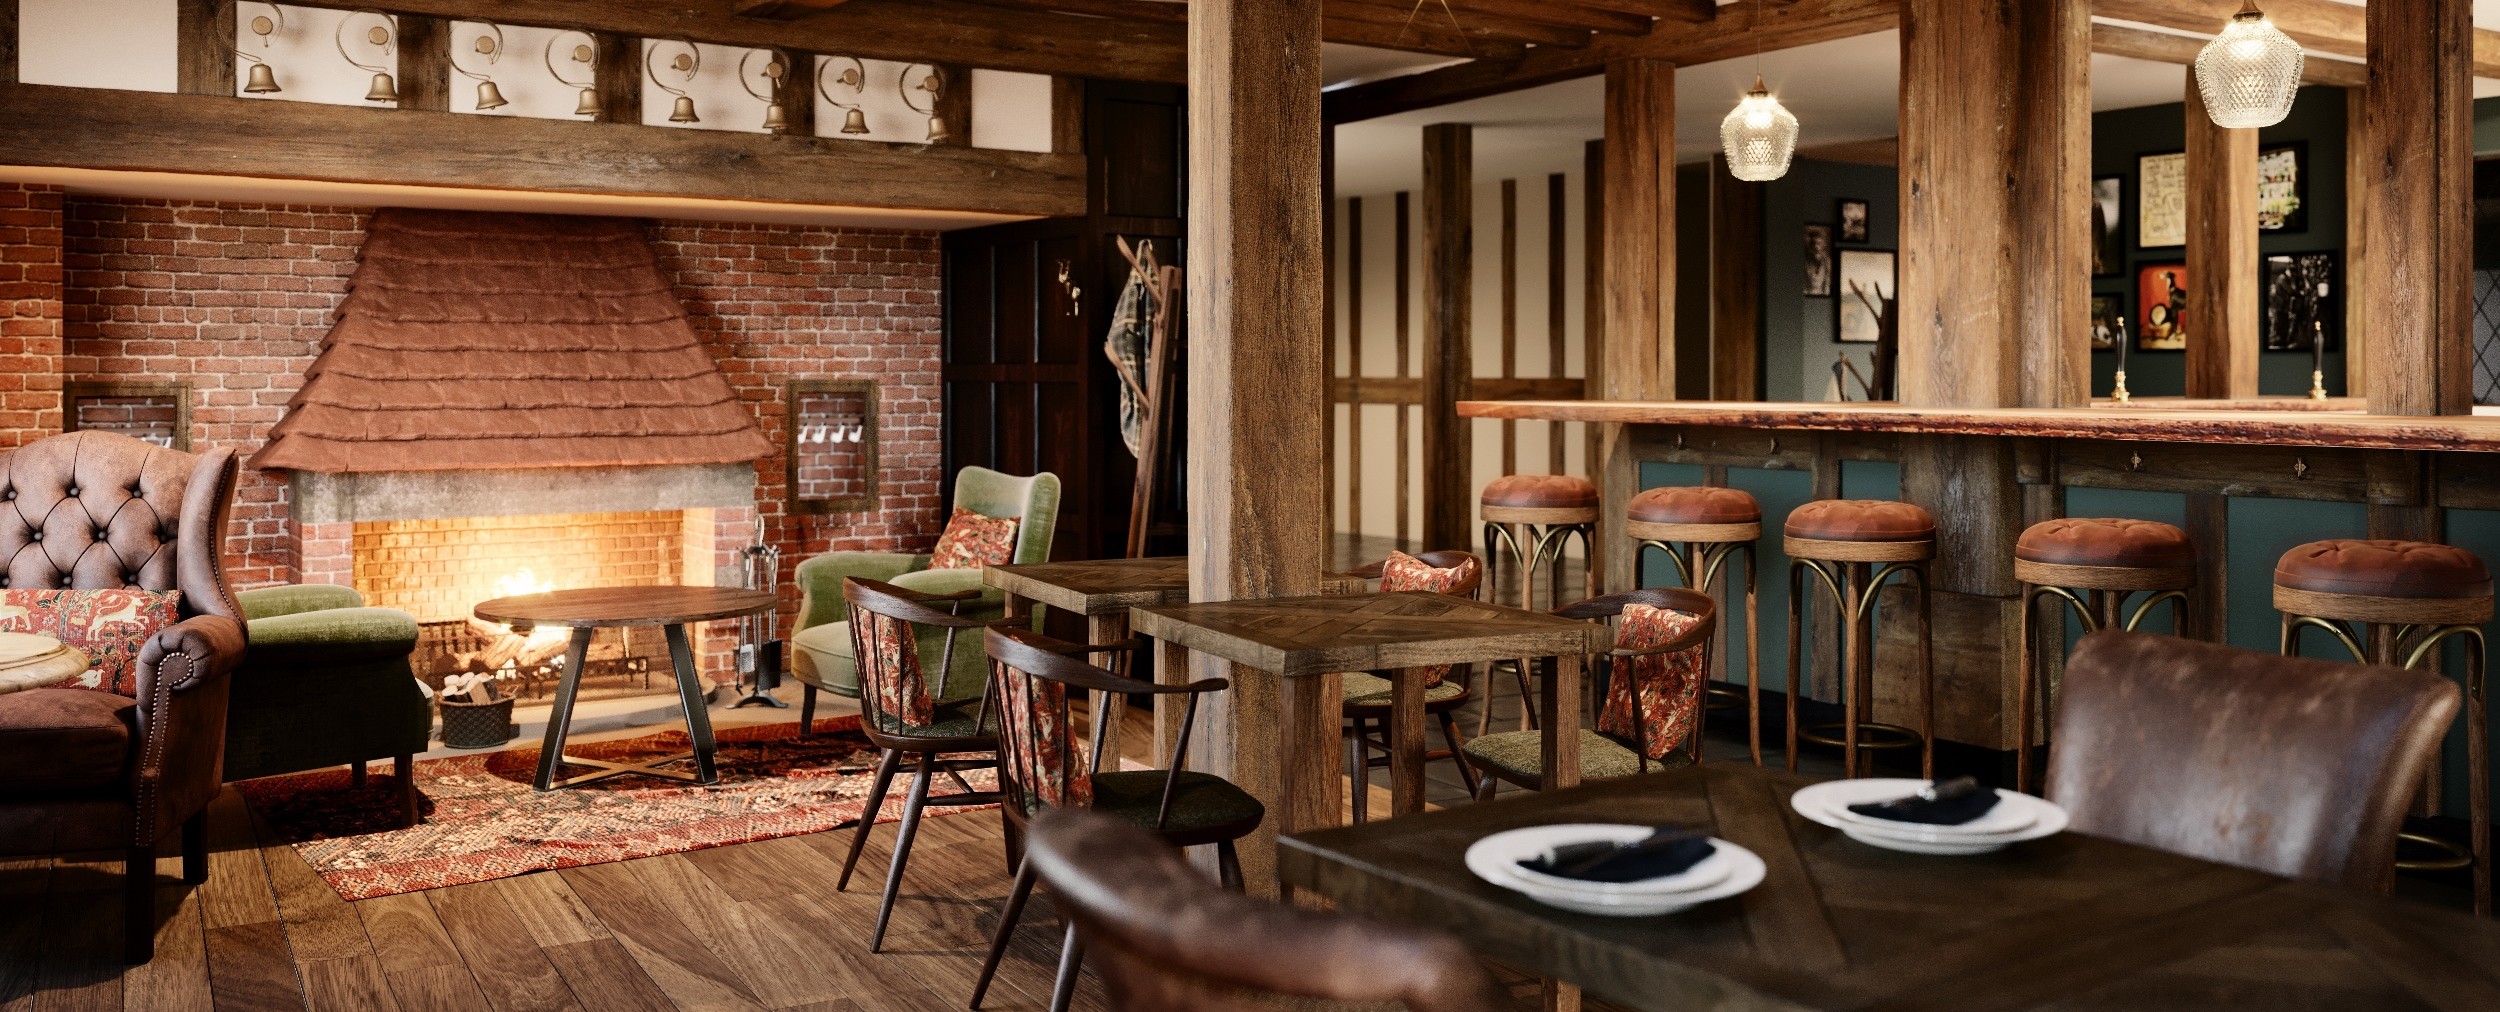 news-main-mike-robinson-to-open-sustainable-restaurant-in-stratford-upon-avon-this-spring.1546877970.jpg